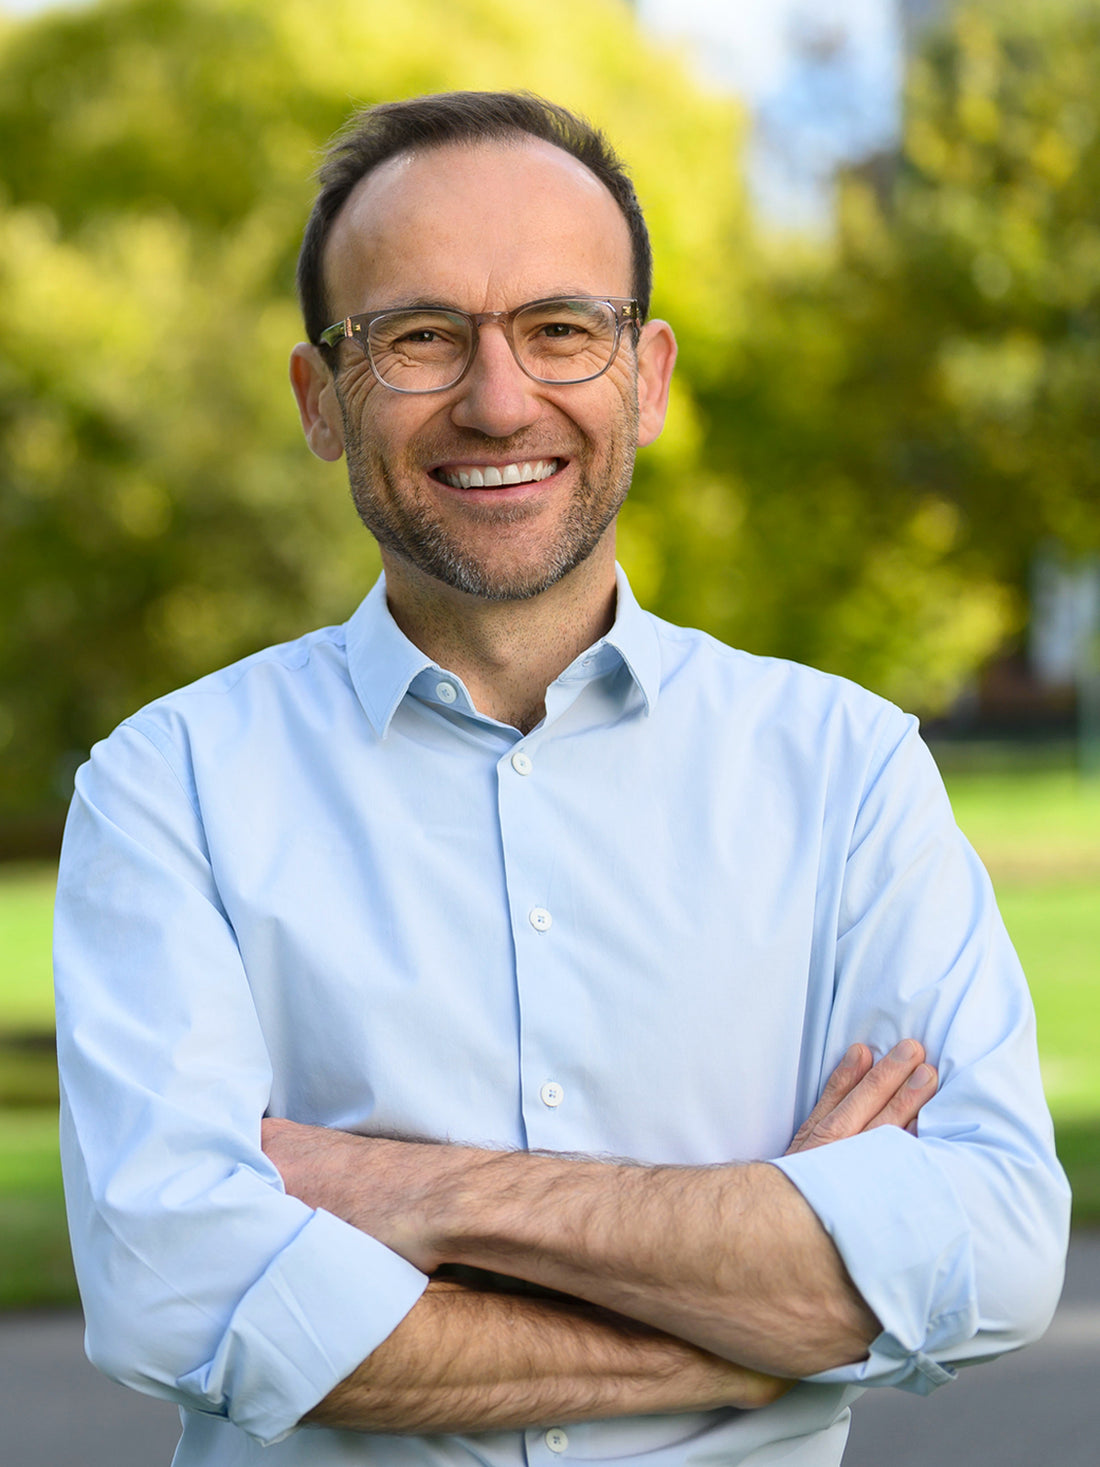 Sockadelic Sparks a "Green" Revolution: Adam Bandt Steps into the Future with Ecological Elegance